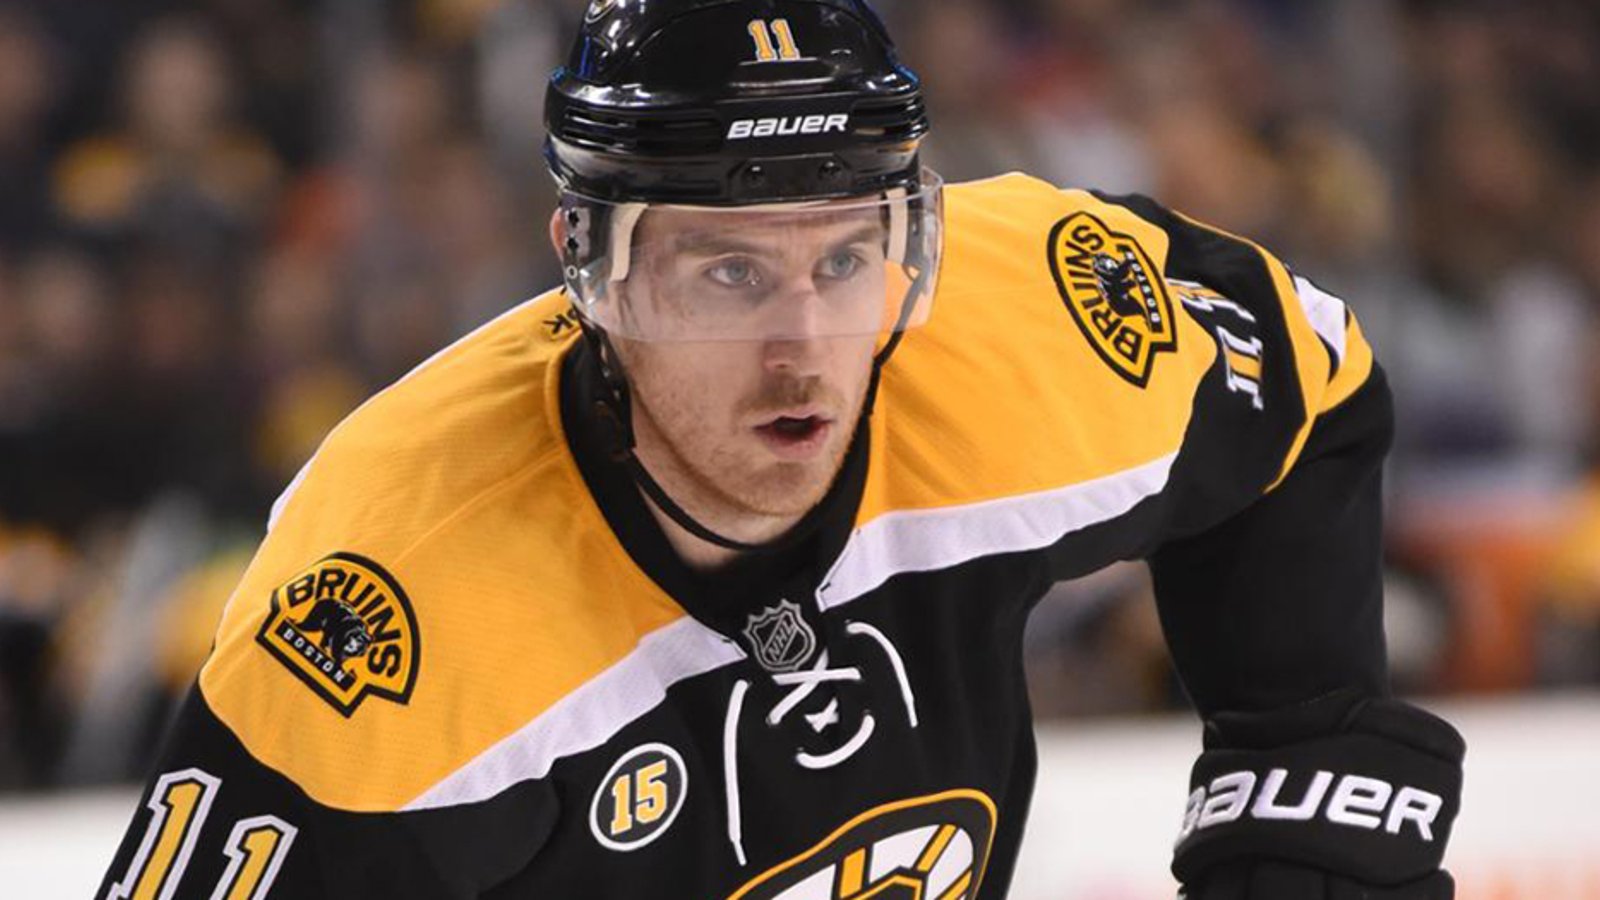 Boston Bruins release several statements following tragic death of Jimmy Hayes 